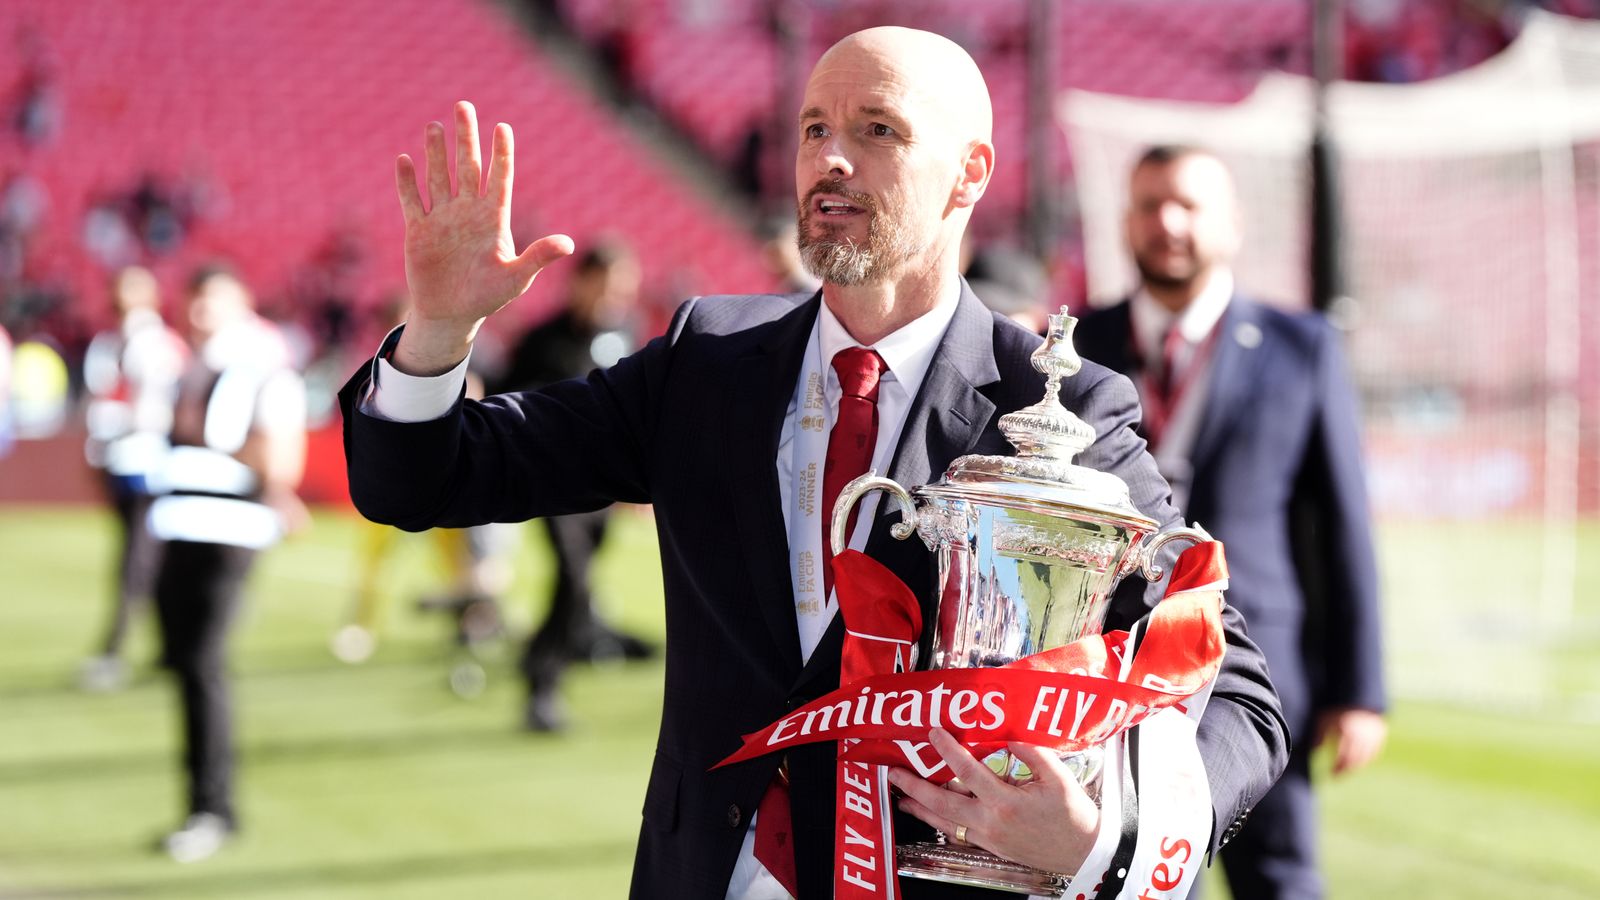 Man Utd win the FA Cup: Erik ten Hag says he will go somewhere else and win trophies if club doesn’t want him | Football News